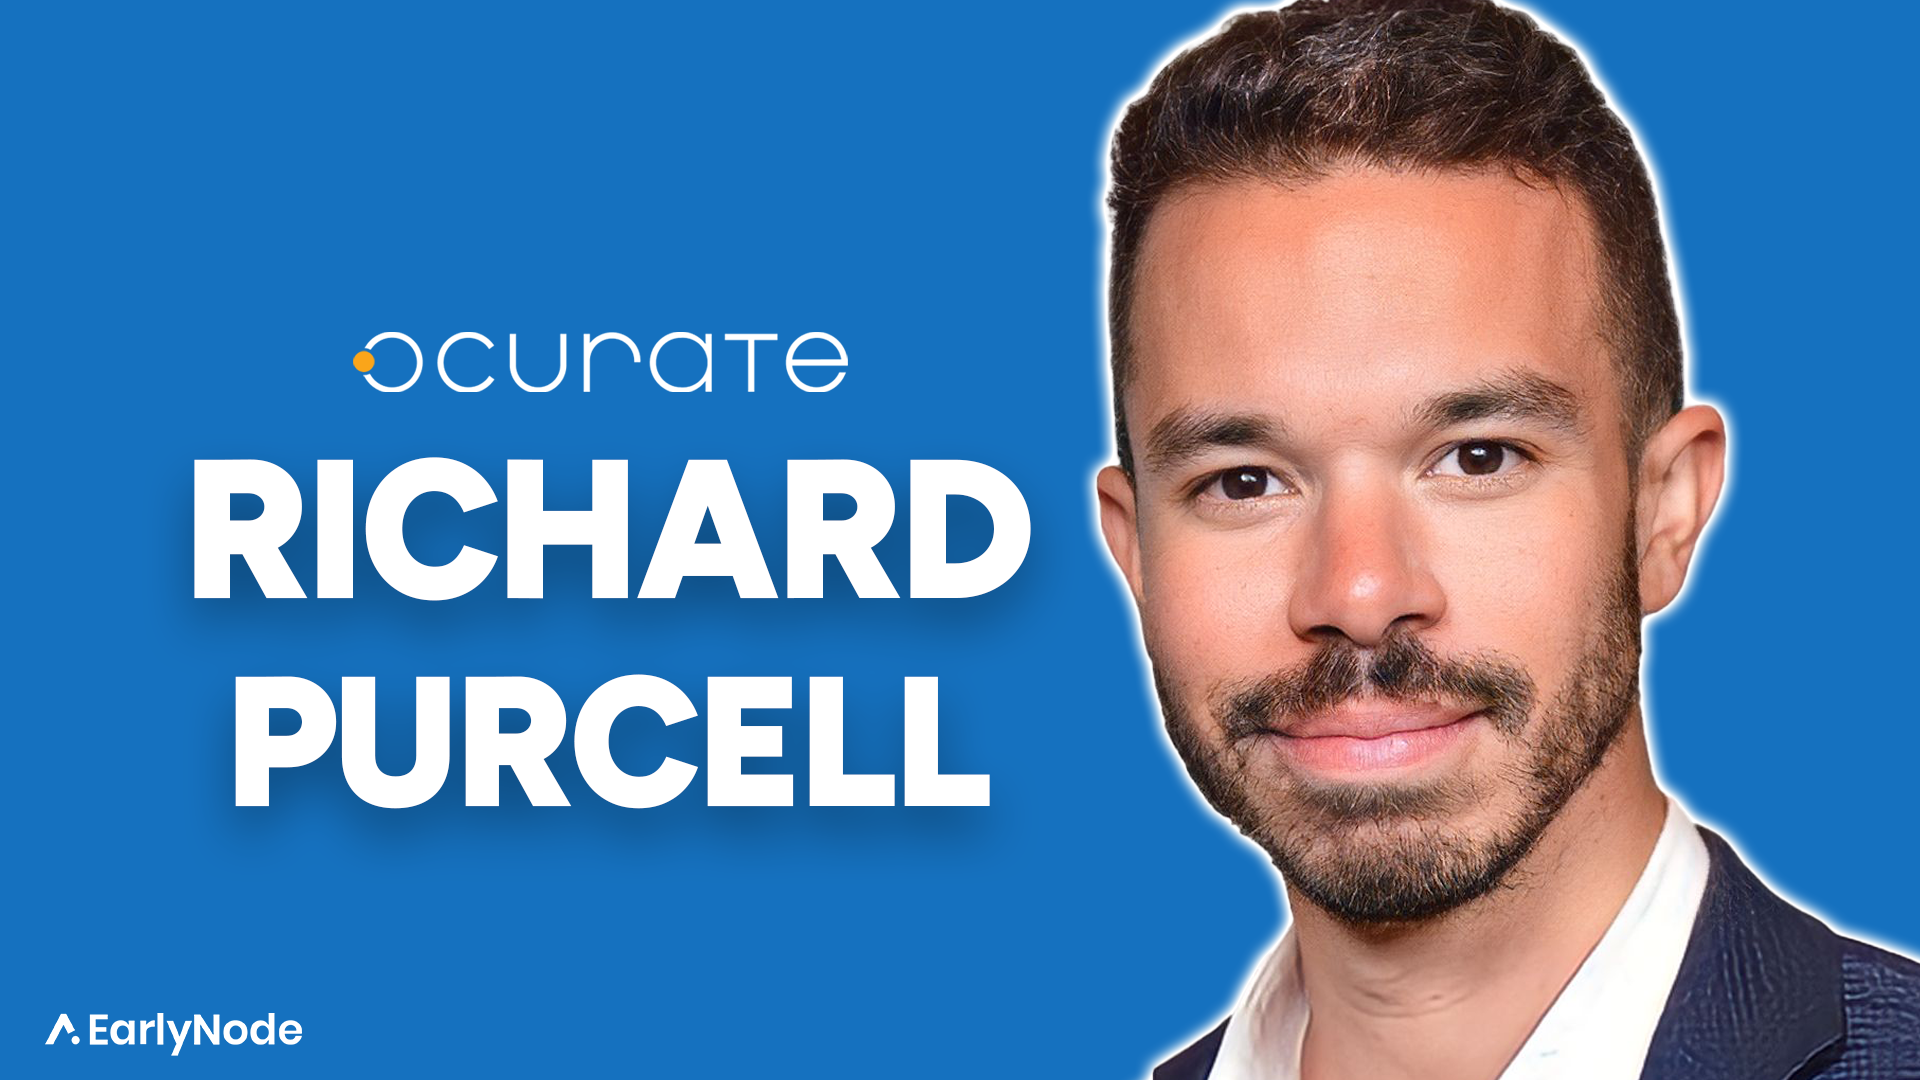 How to find Product-Market Fit and Build Marketing Funnels, with Richard Purcell from Ocurate